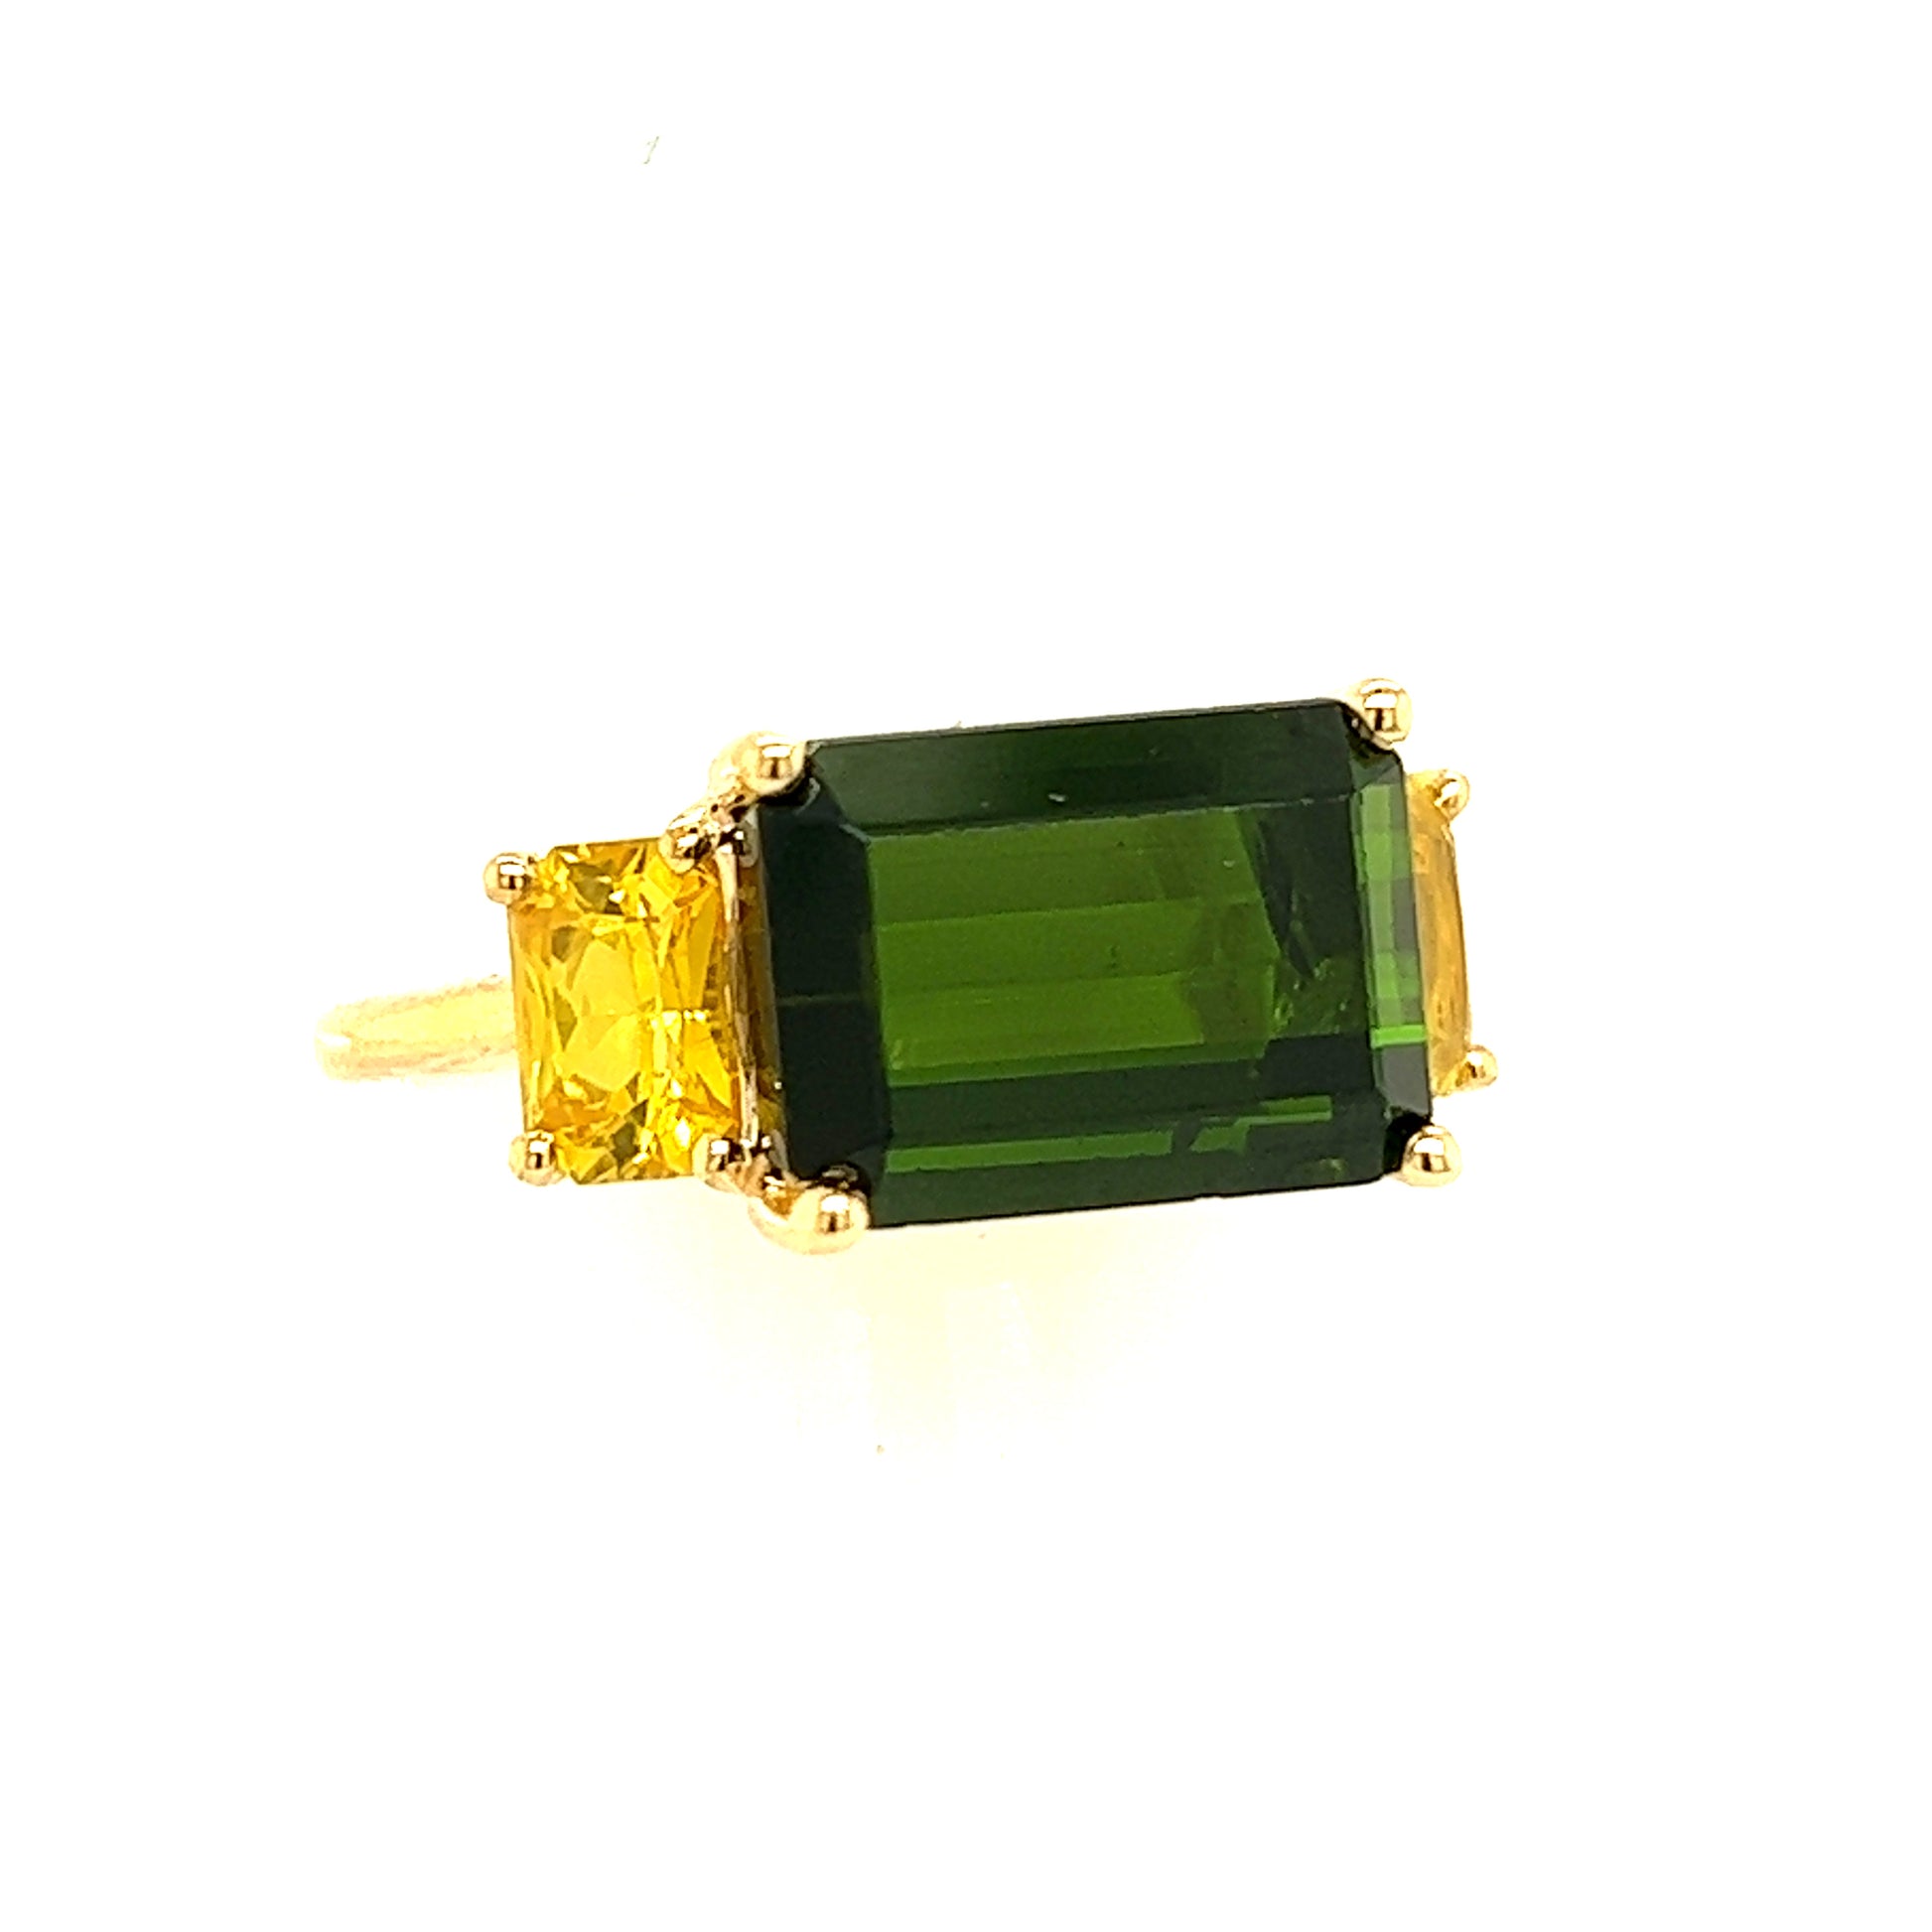 Natural Tourmaline Diamond Ring Size 7 14 Y Gold 6.15 TCW Certified $5,975 219225